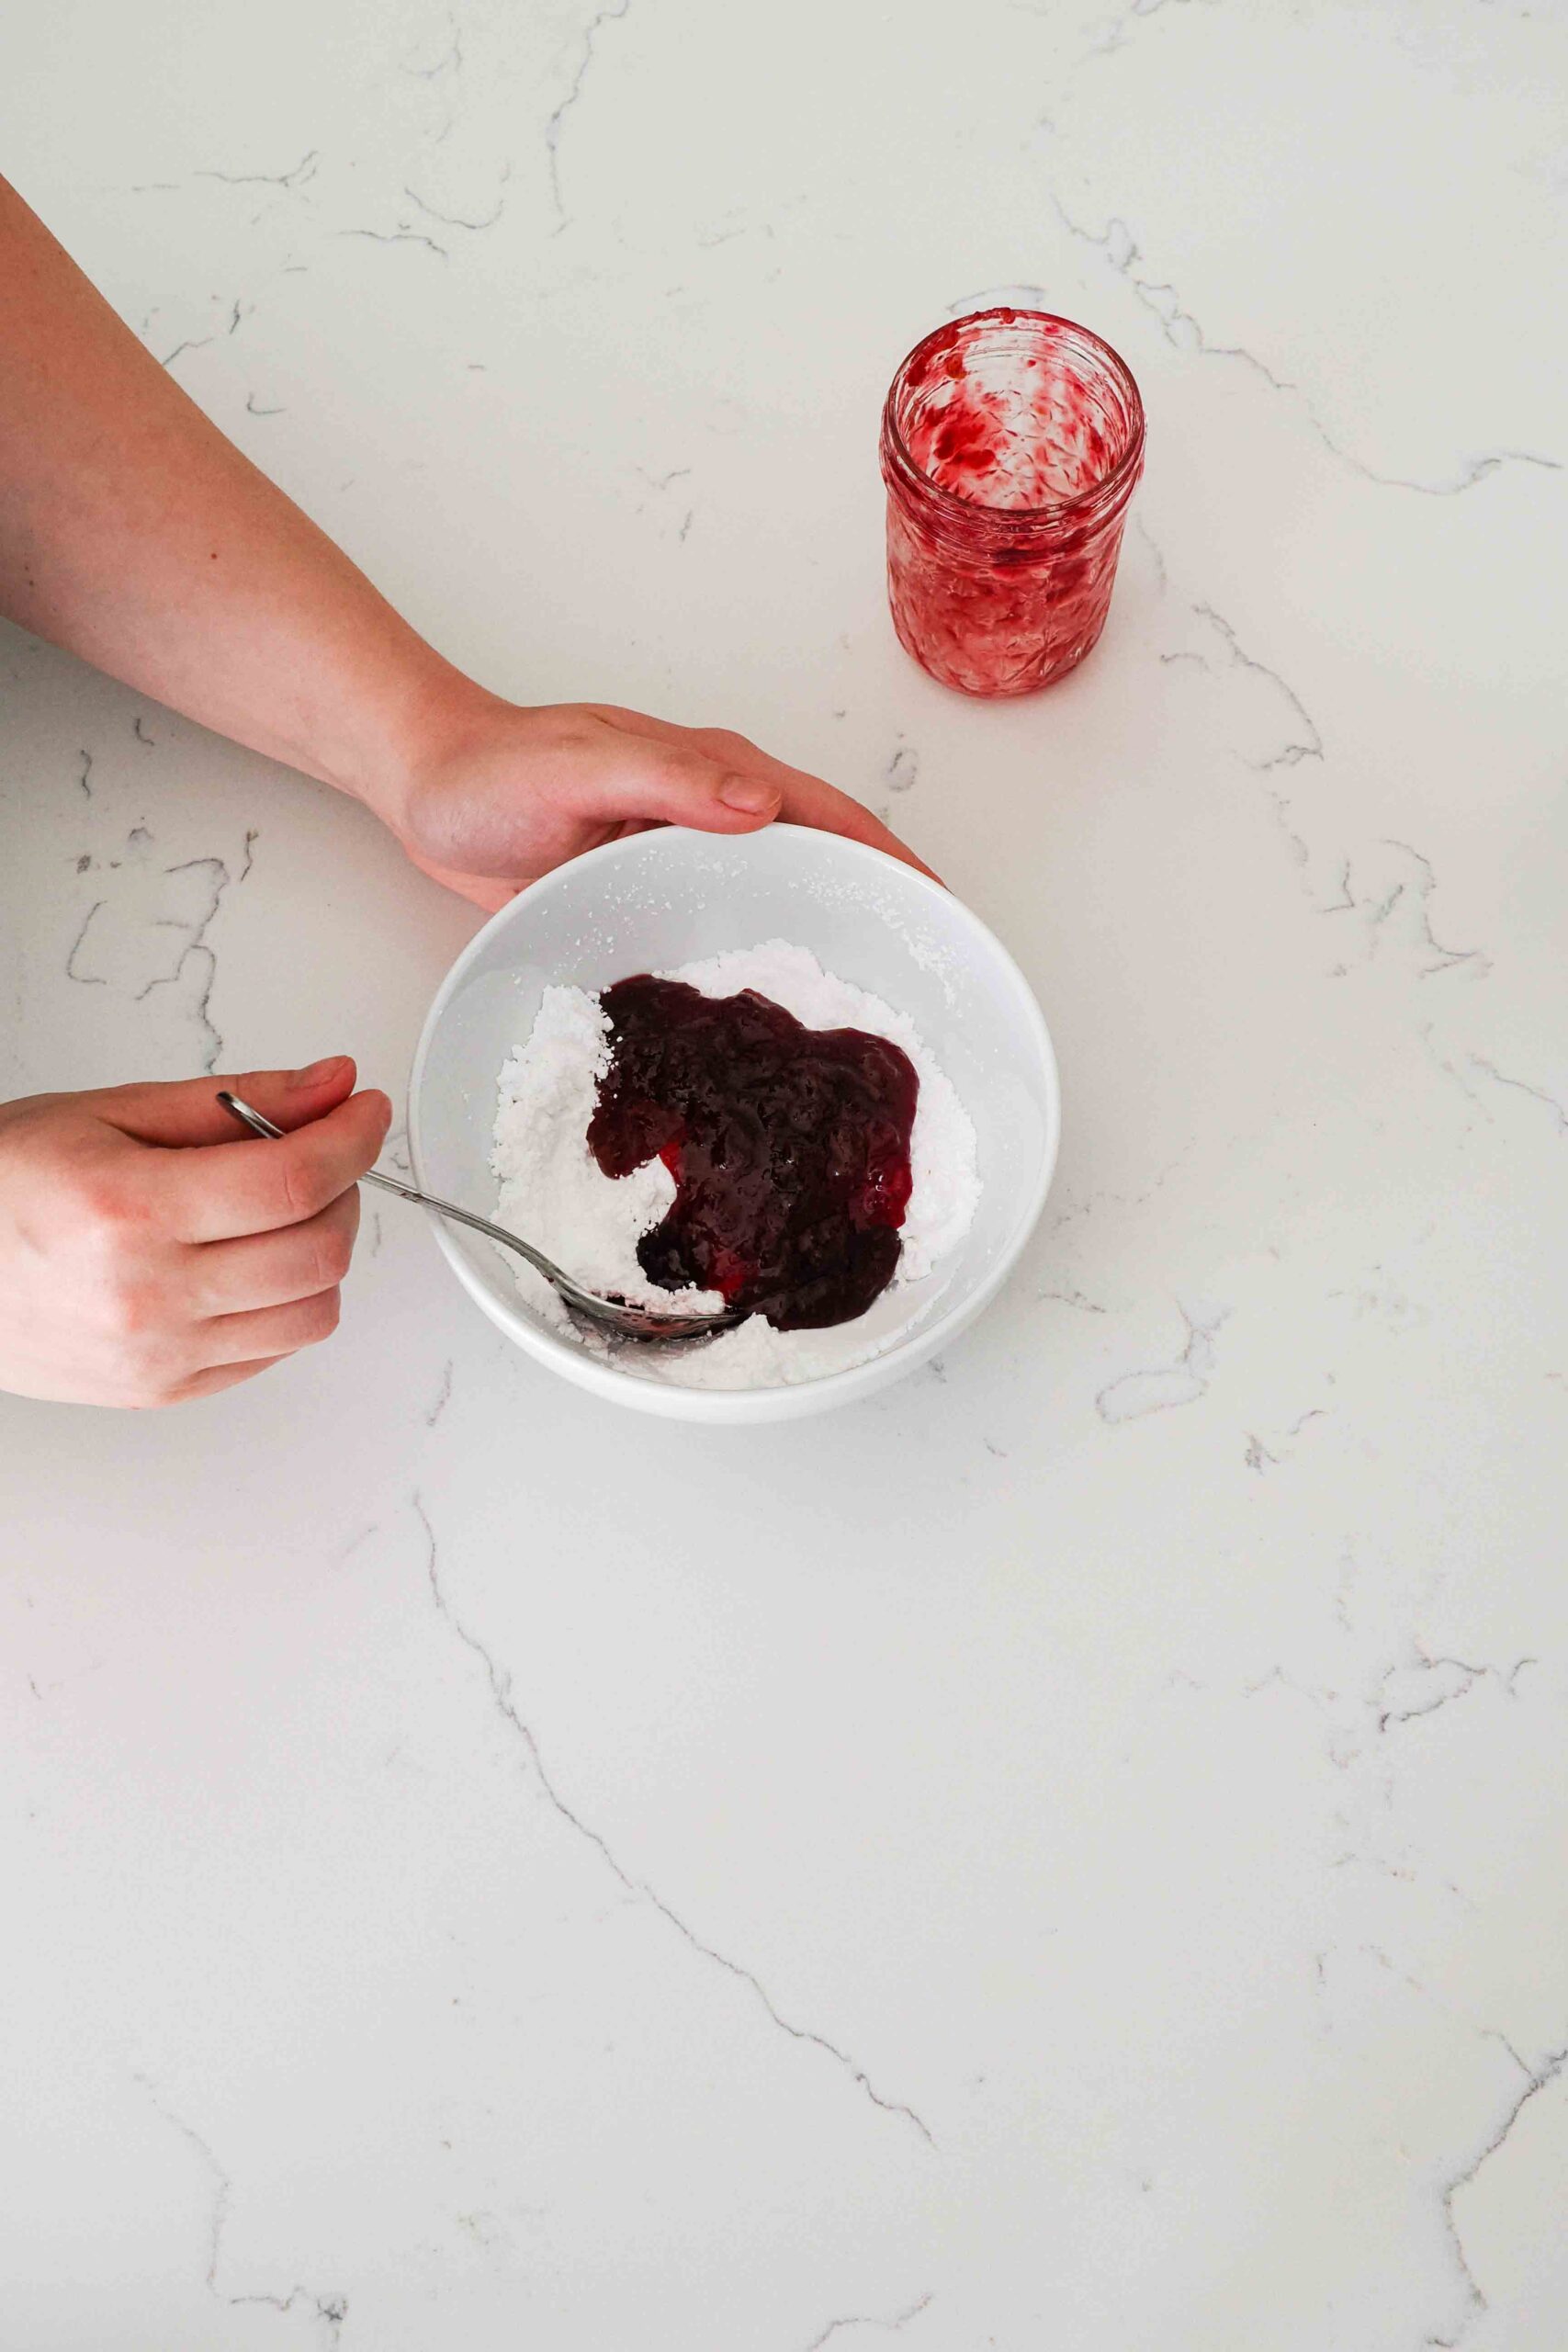 Two hands begin stirring together cherry jam and powdered sugar in a white bowl.